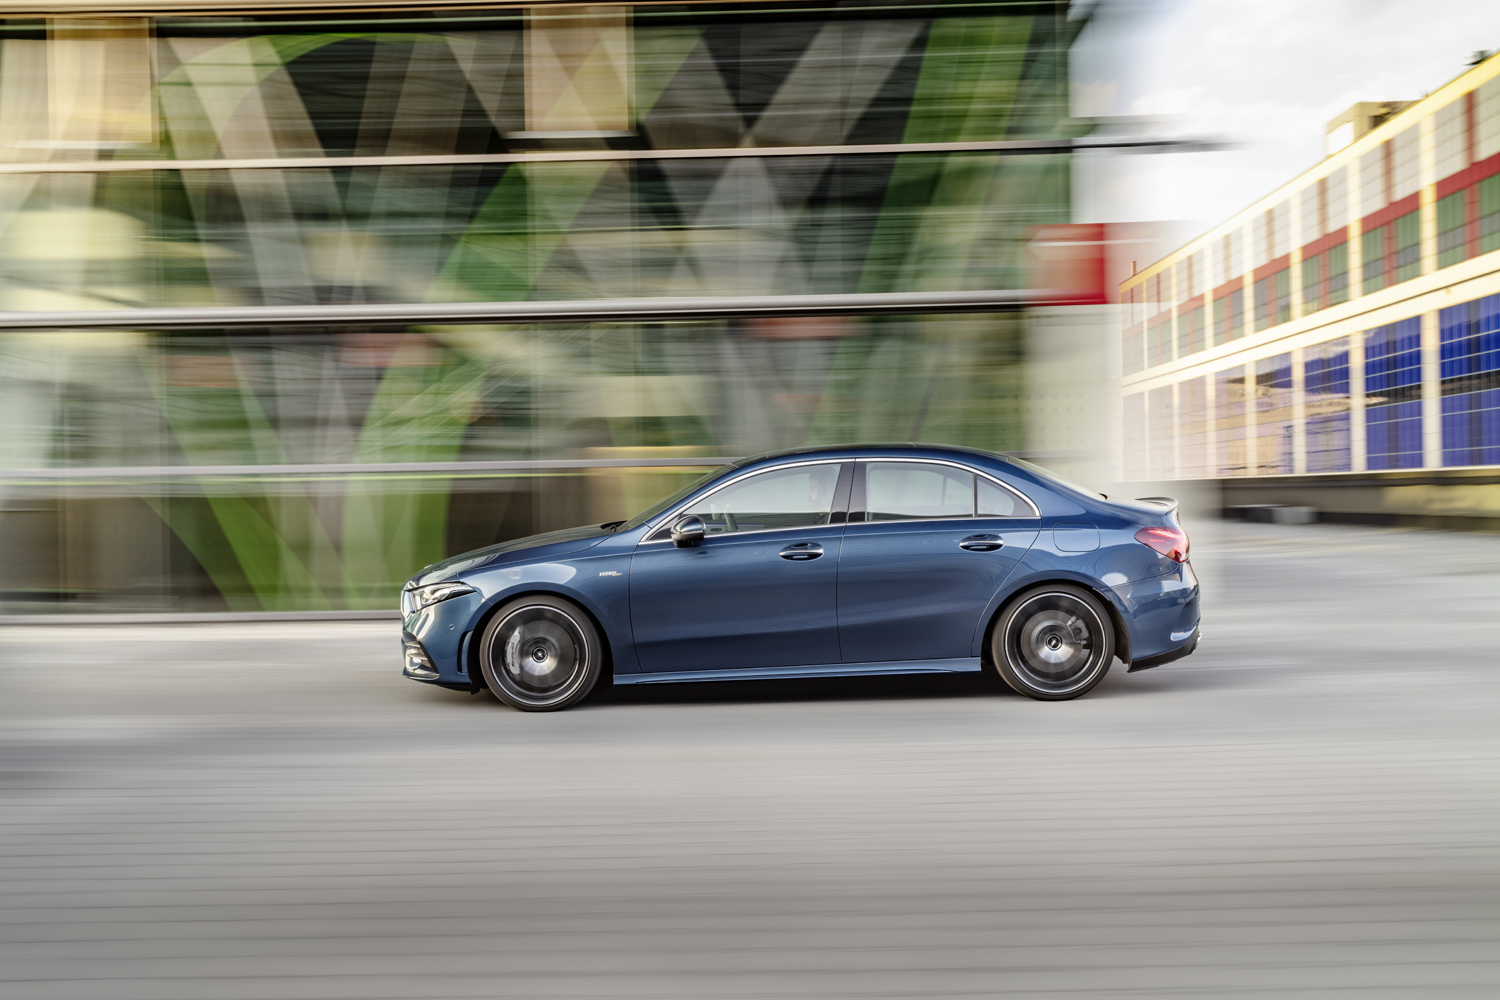 2020 mercedes amg a35 300 hp sport sedan is smart stylish and quick a 35 4matic limousine  s